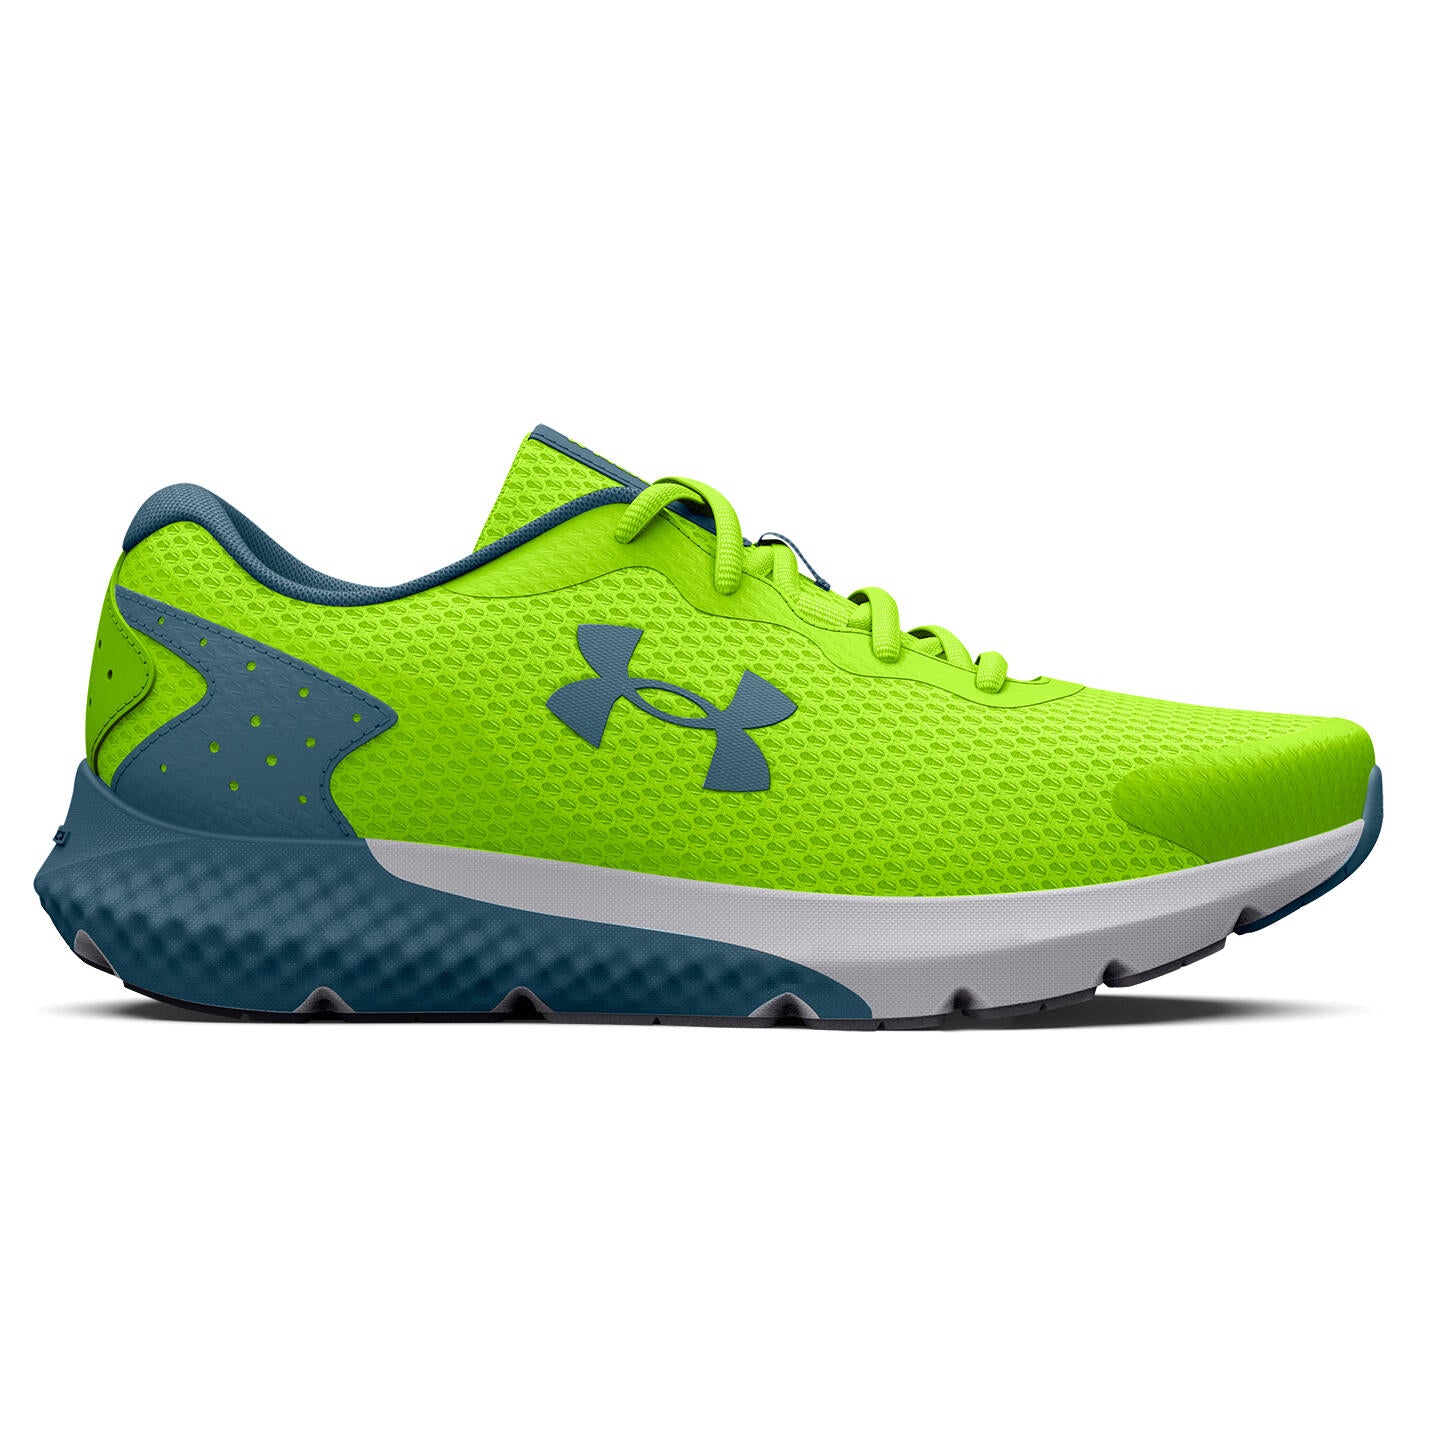 Under Armour Charged Escape Men's Running Shoe Green